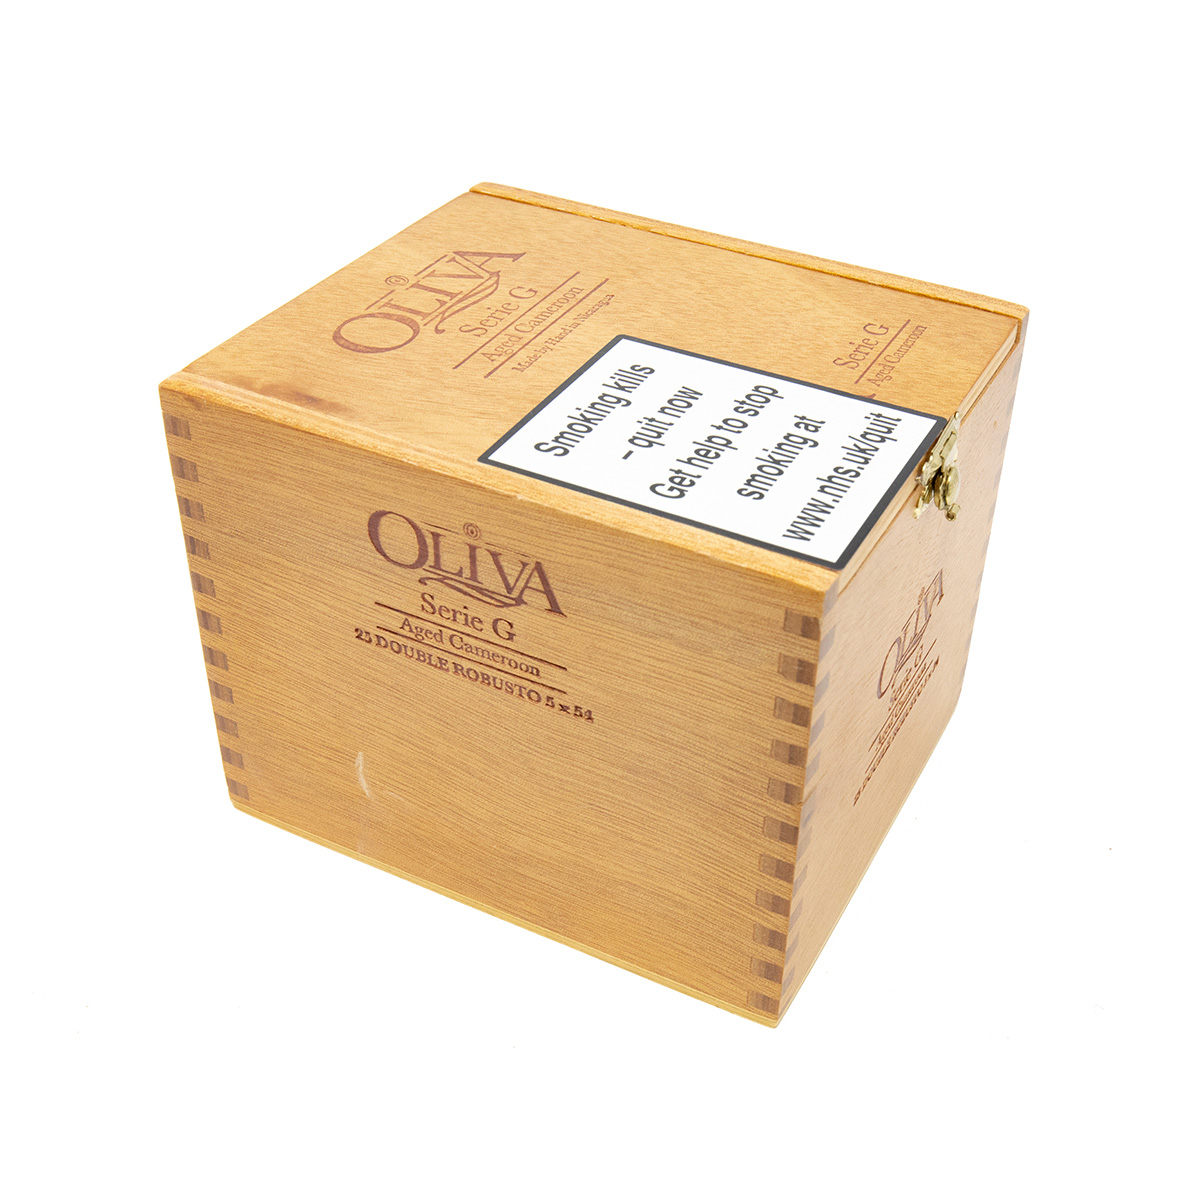 Oliva - Nicaragua - Serie G Natural Double Robusto (Box of 25)